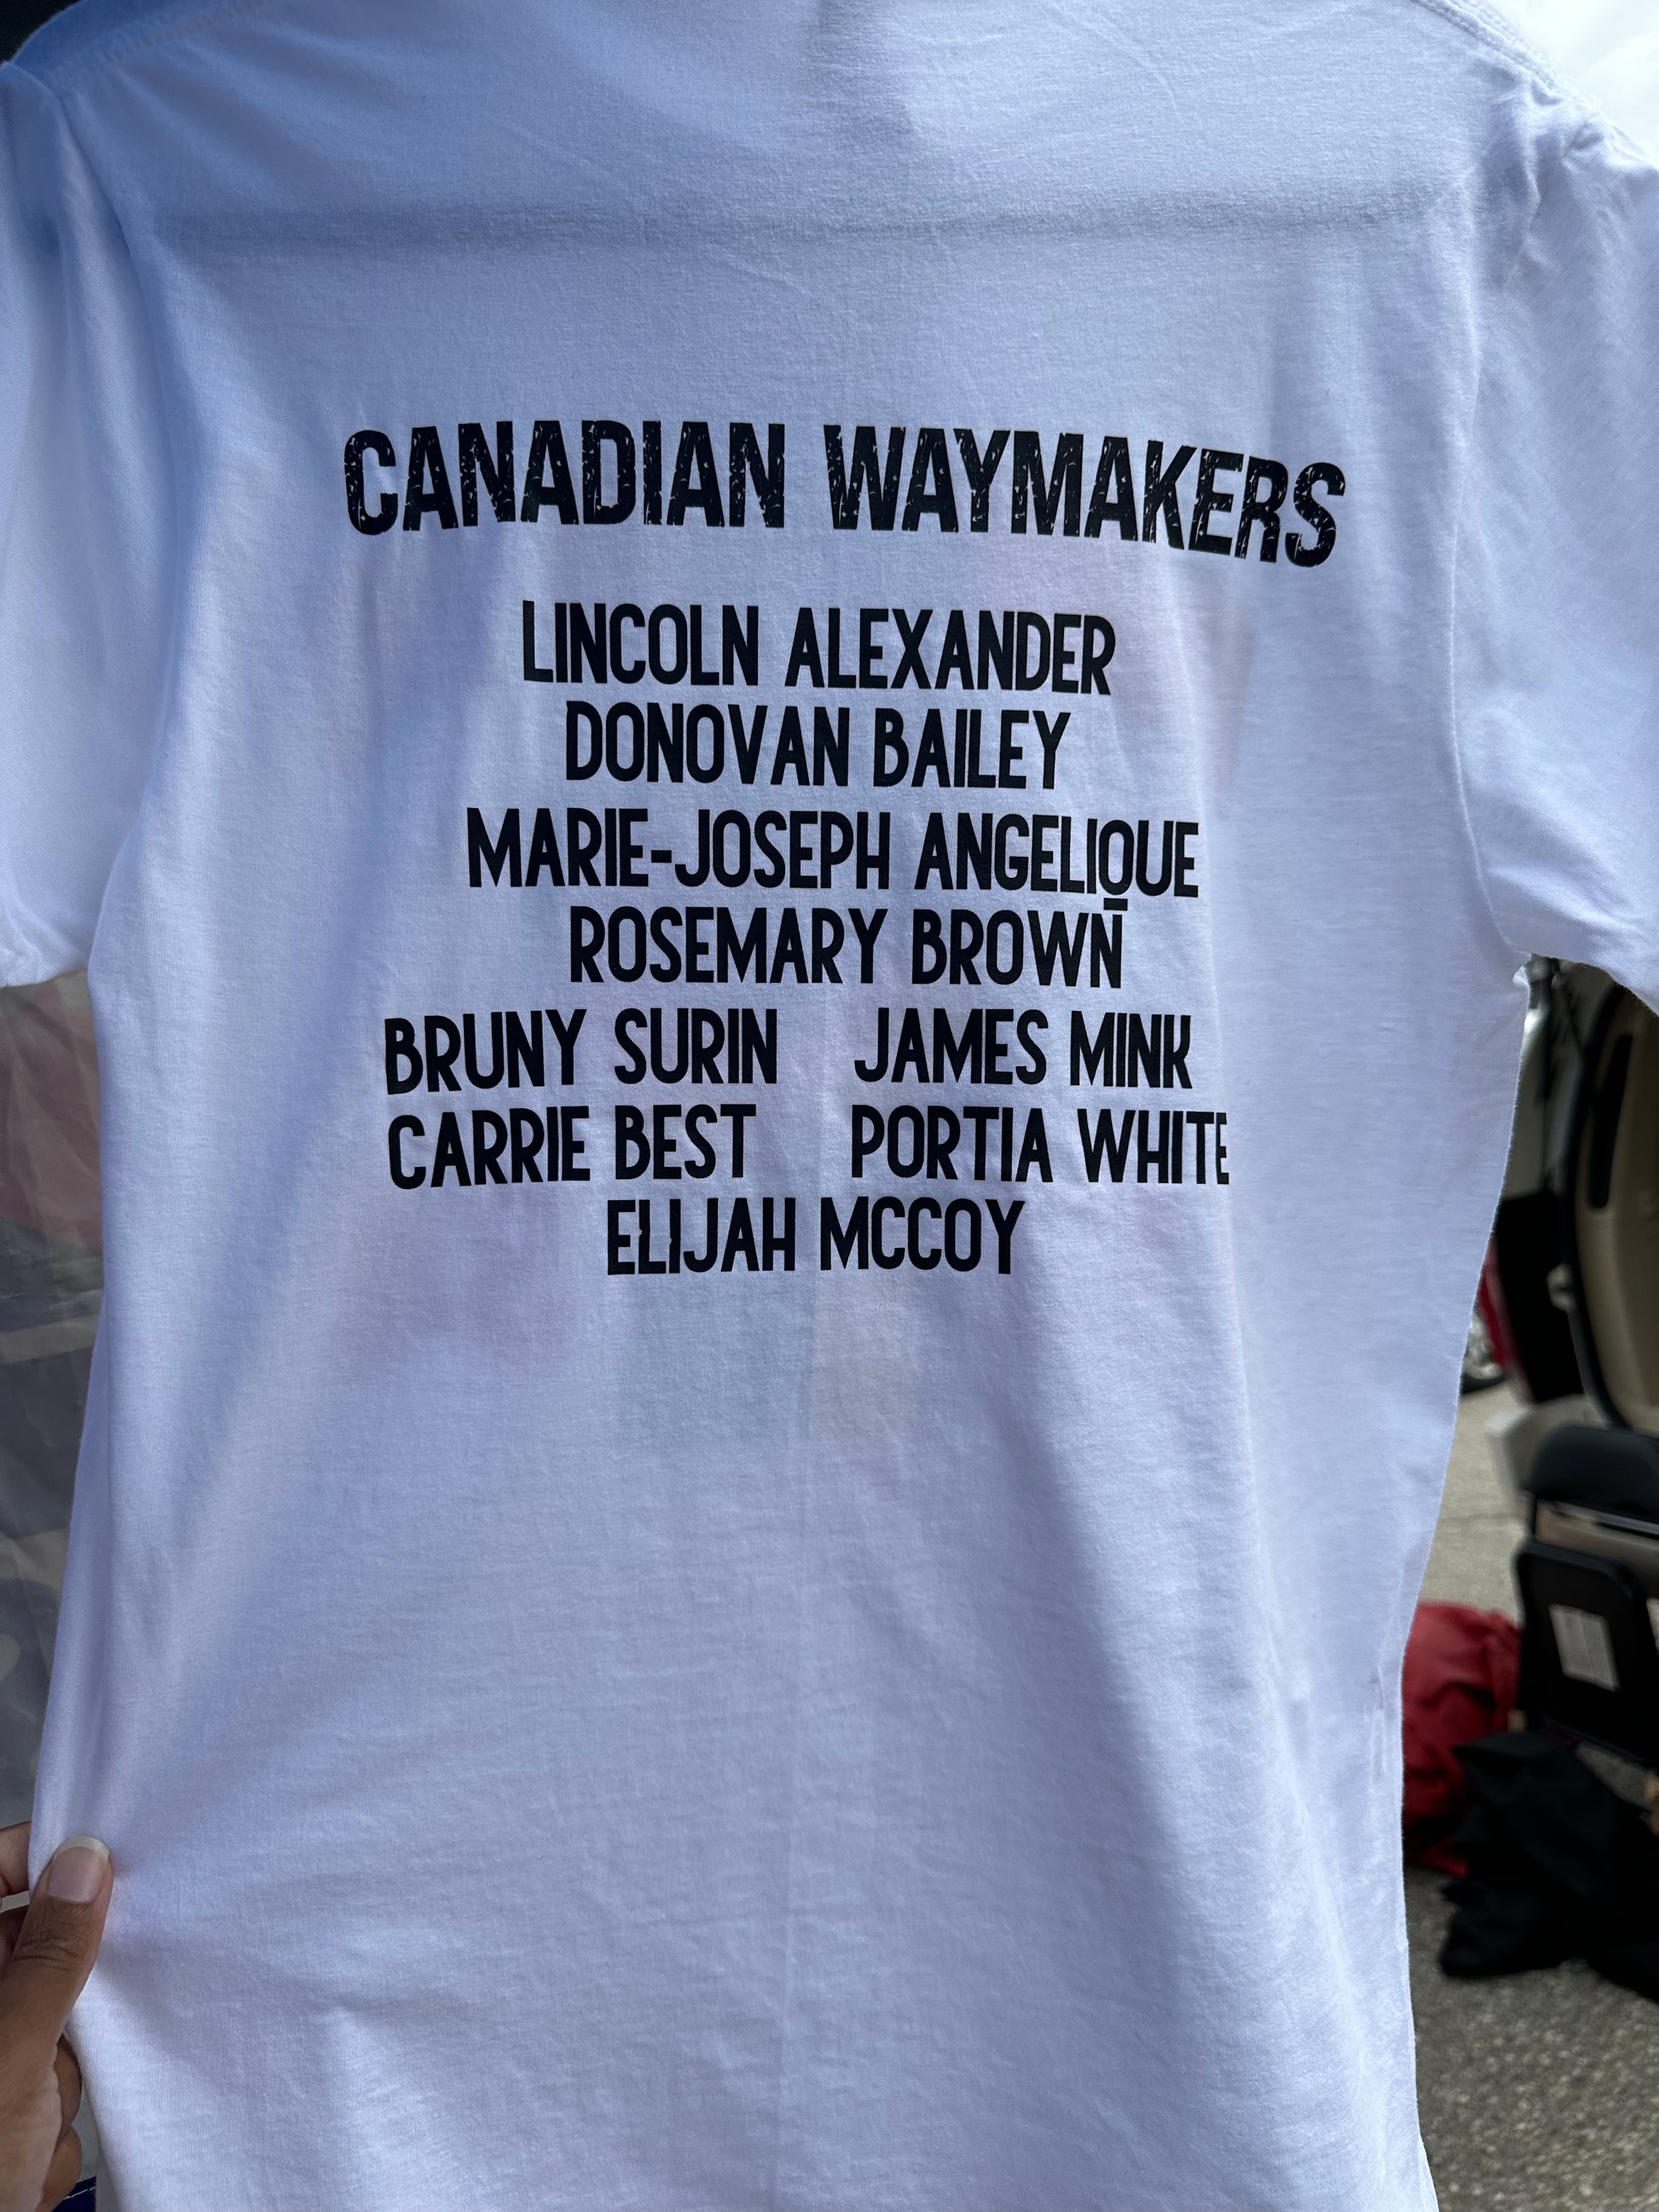 The back of the shirt honors notable Canadian Waymakers, including Lincoln Alexander, Donovan Bailey, Marie-Joseph Angelique, Rosemary Brown, Bruny Surin, James Mink, Carrie Best, Portia White, and Elijah McCoy, celebrating their significant contributions and the perseverance of Black communities in Canada in black text. Melanin Apparel. 